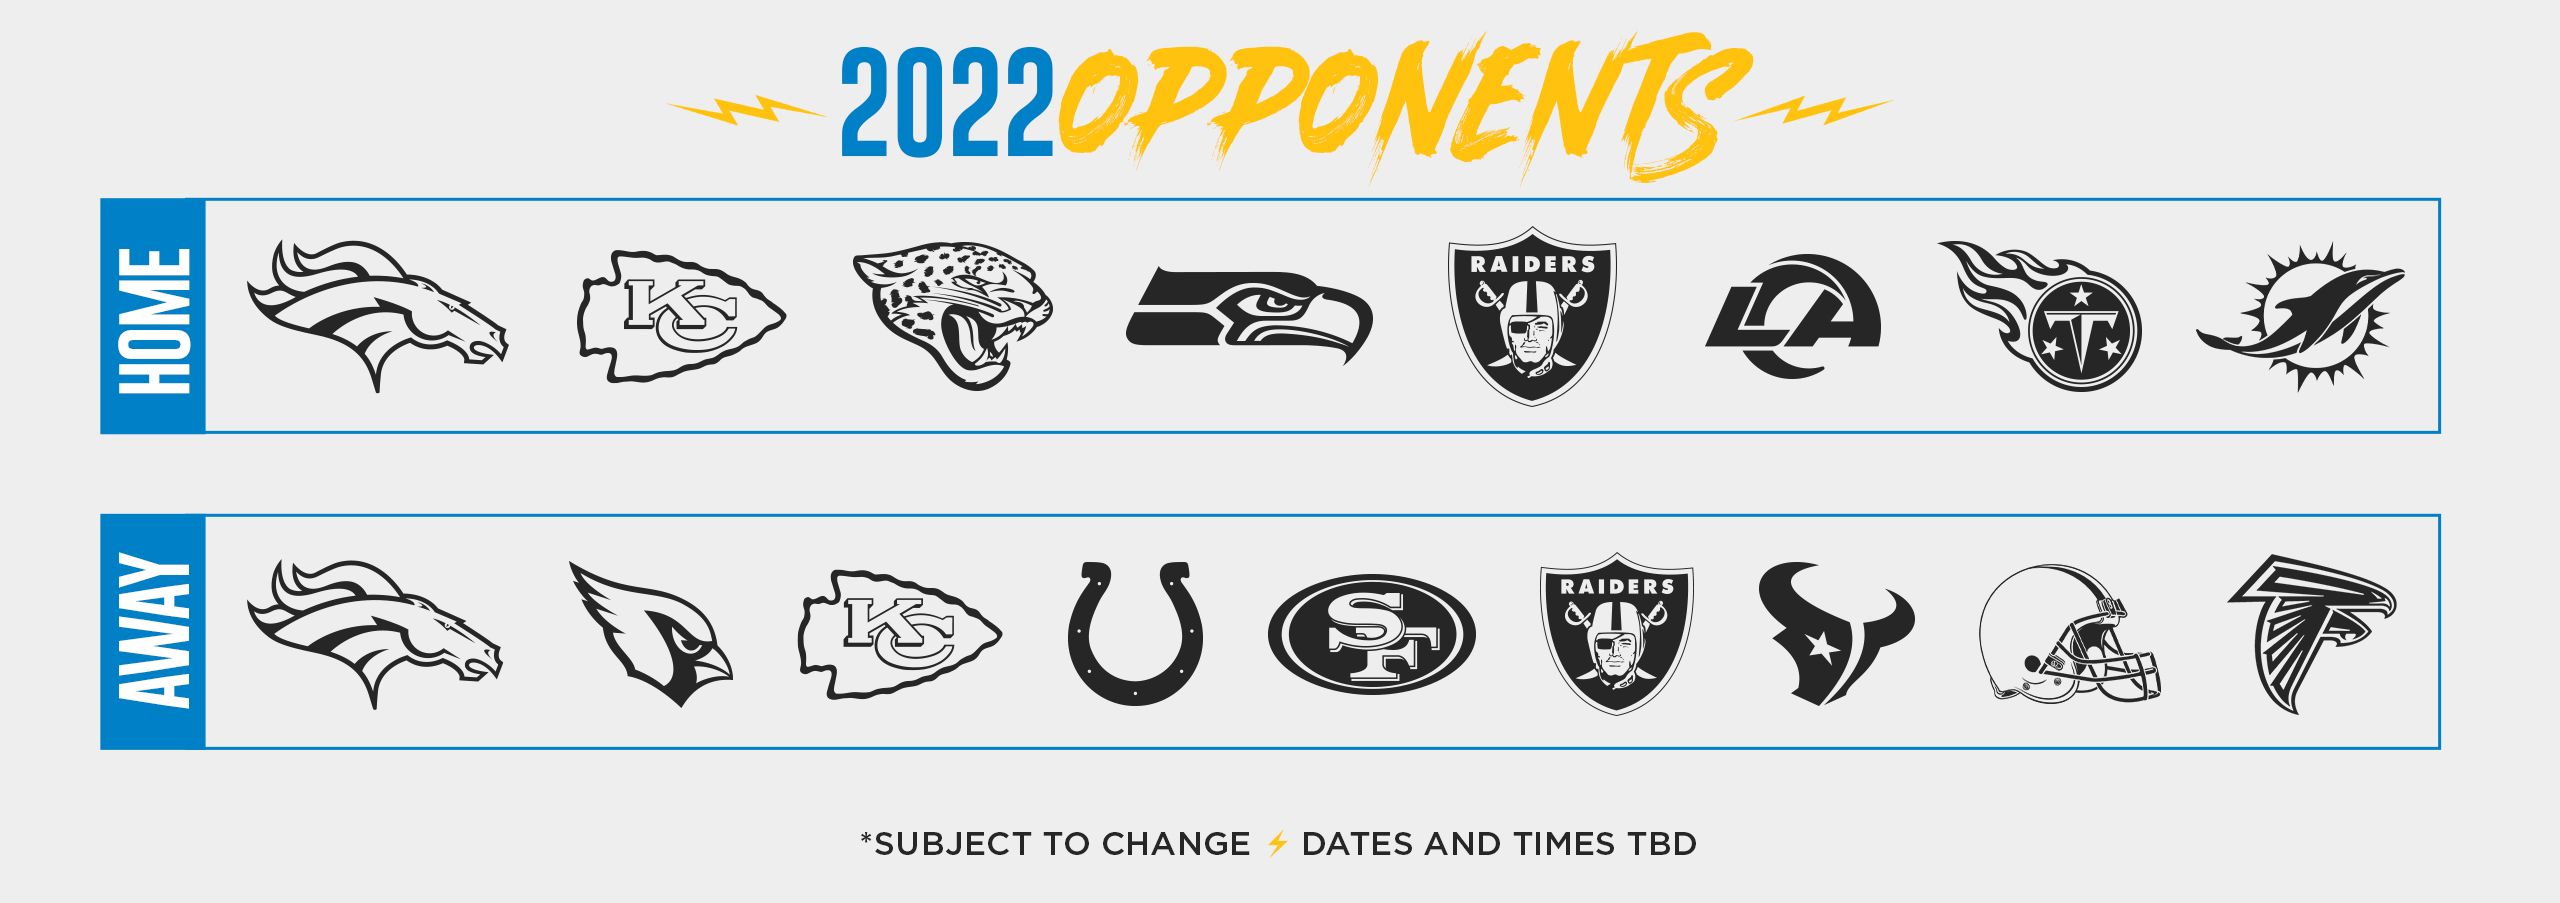 Los Angeles Chargers Schedule 2022 Chargers 2022 Future Opponents | Los Angeles Chargers - Chargers.com